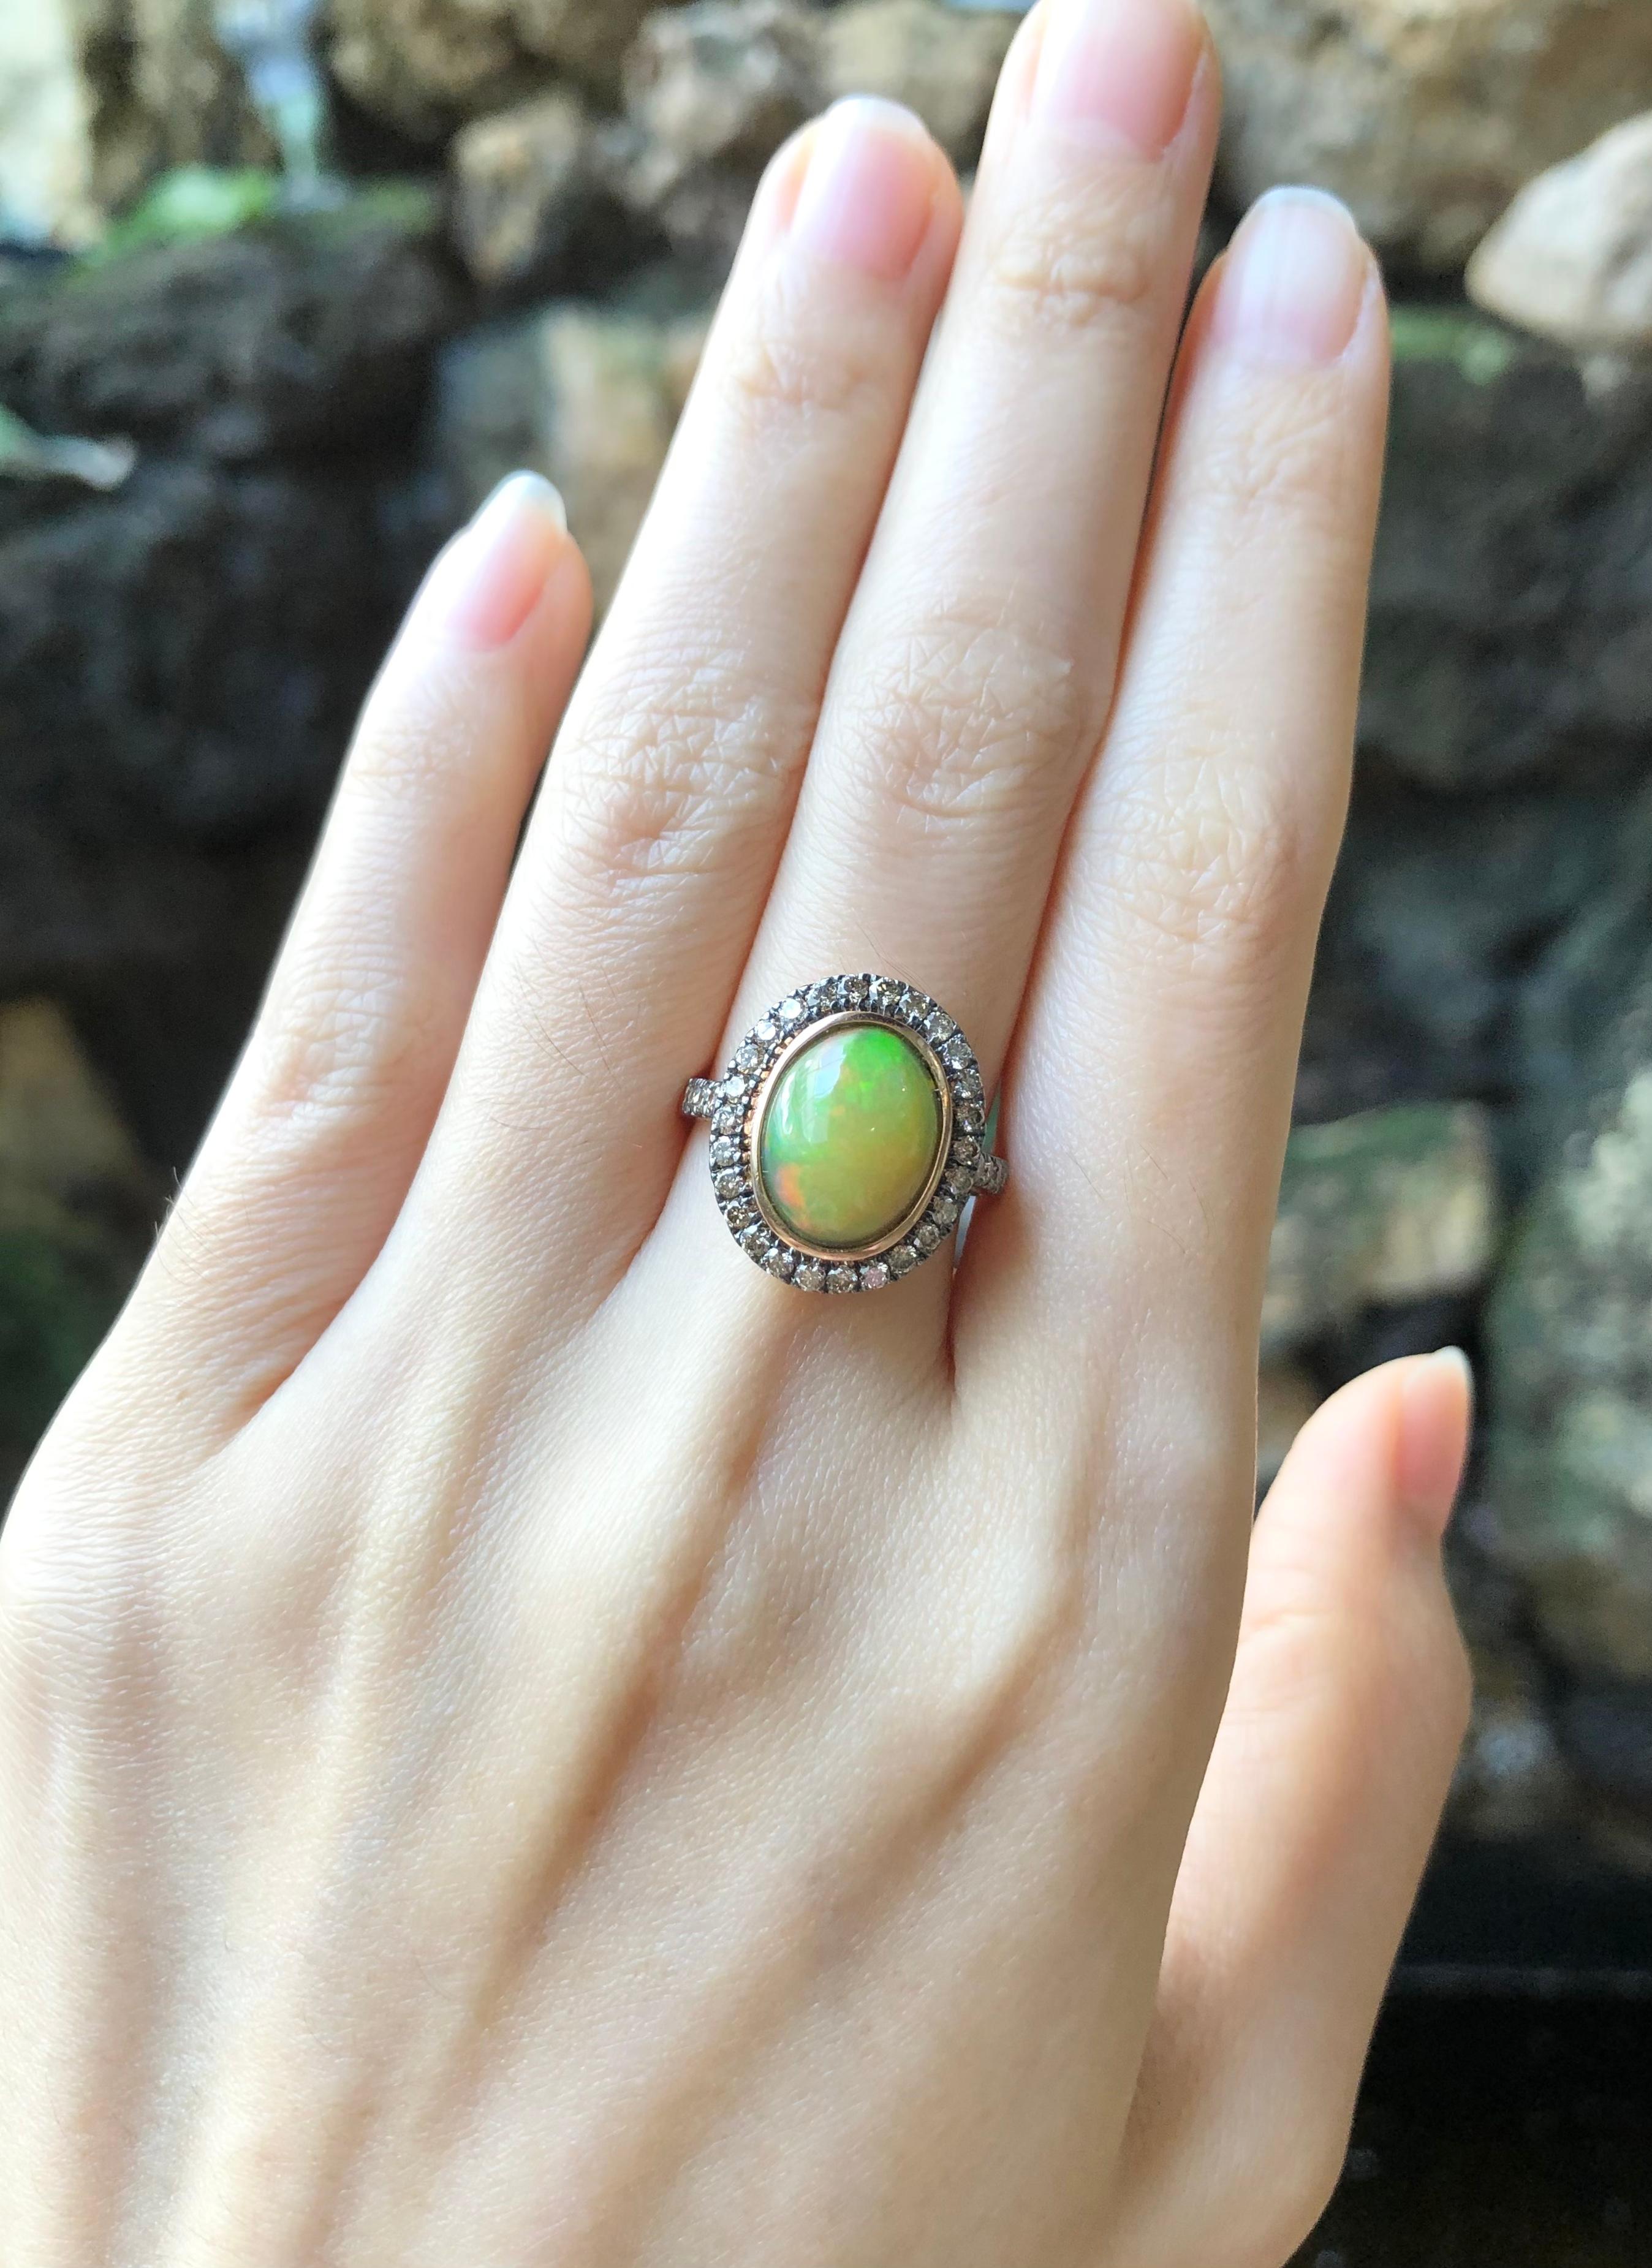 Opal 2.58 carats with Brown Diamond 0.63 carat Ring set in 18 Karat Rose Gold Settings

Width:  1.2 cm 
Length: 1.6 cm
Ring Size: 52
Total Weight: 6.12 grams


